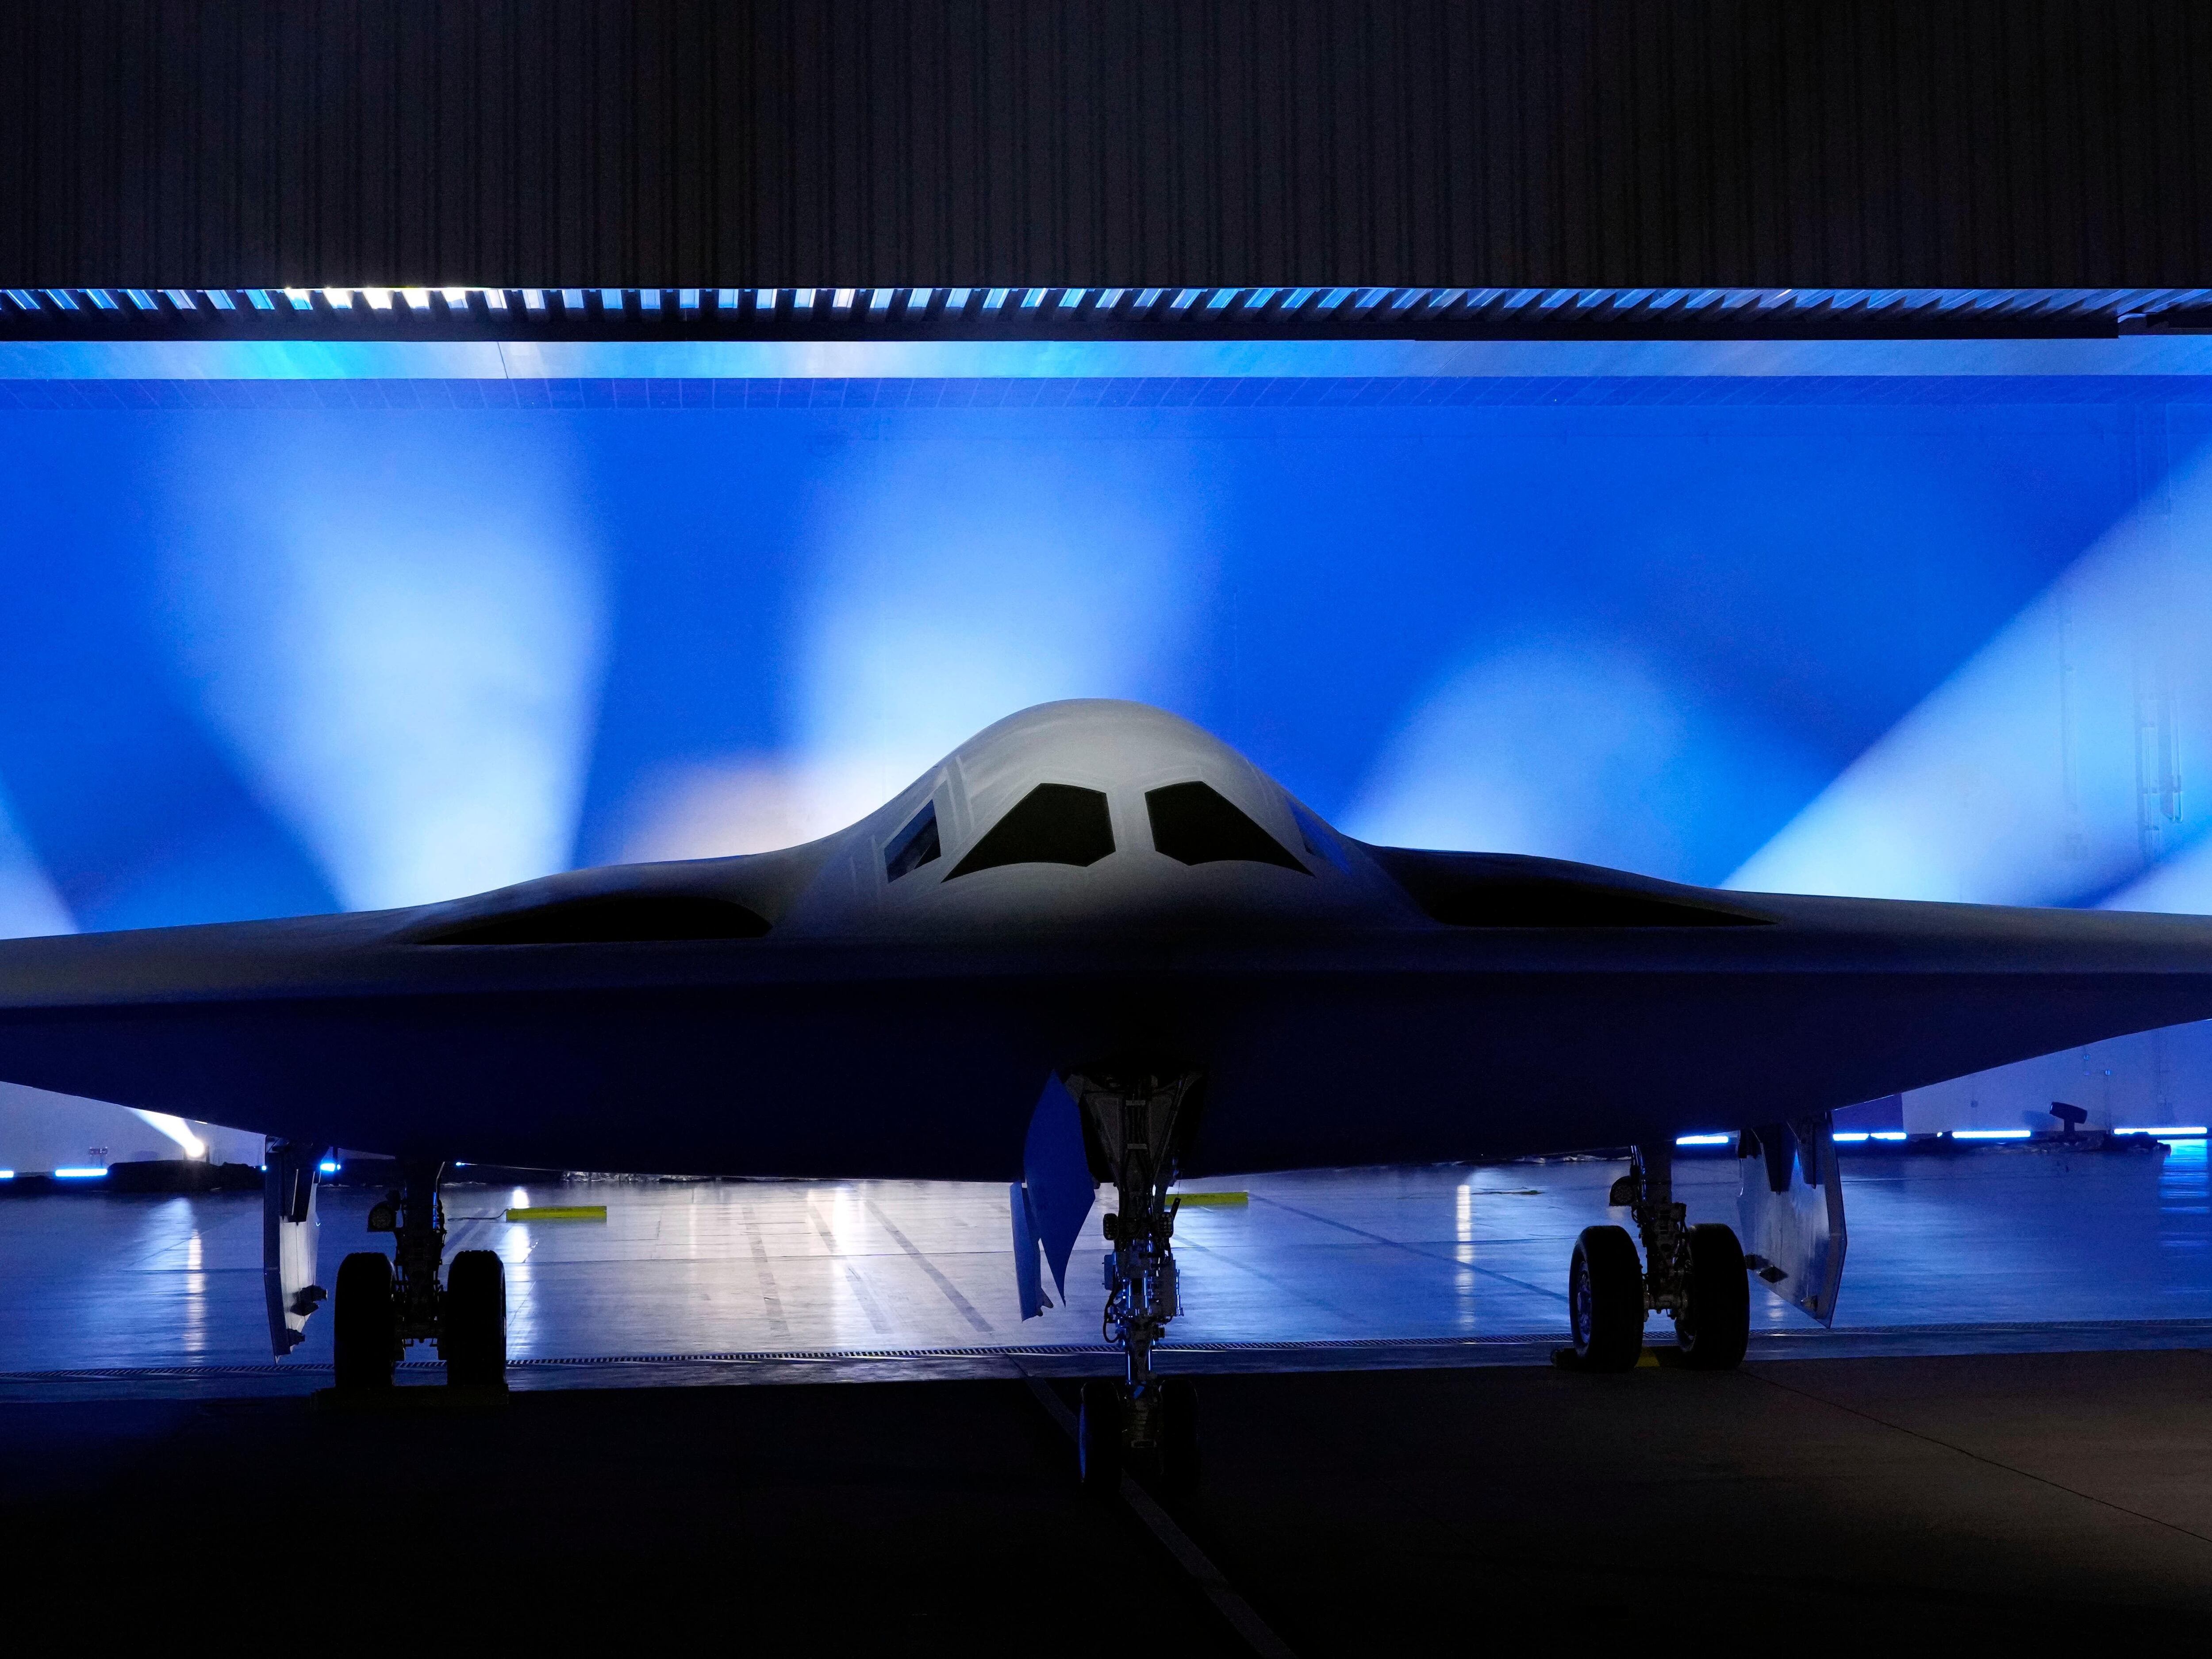 US air force’s new nuclear stealth bomber takes first test flight